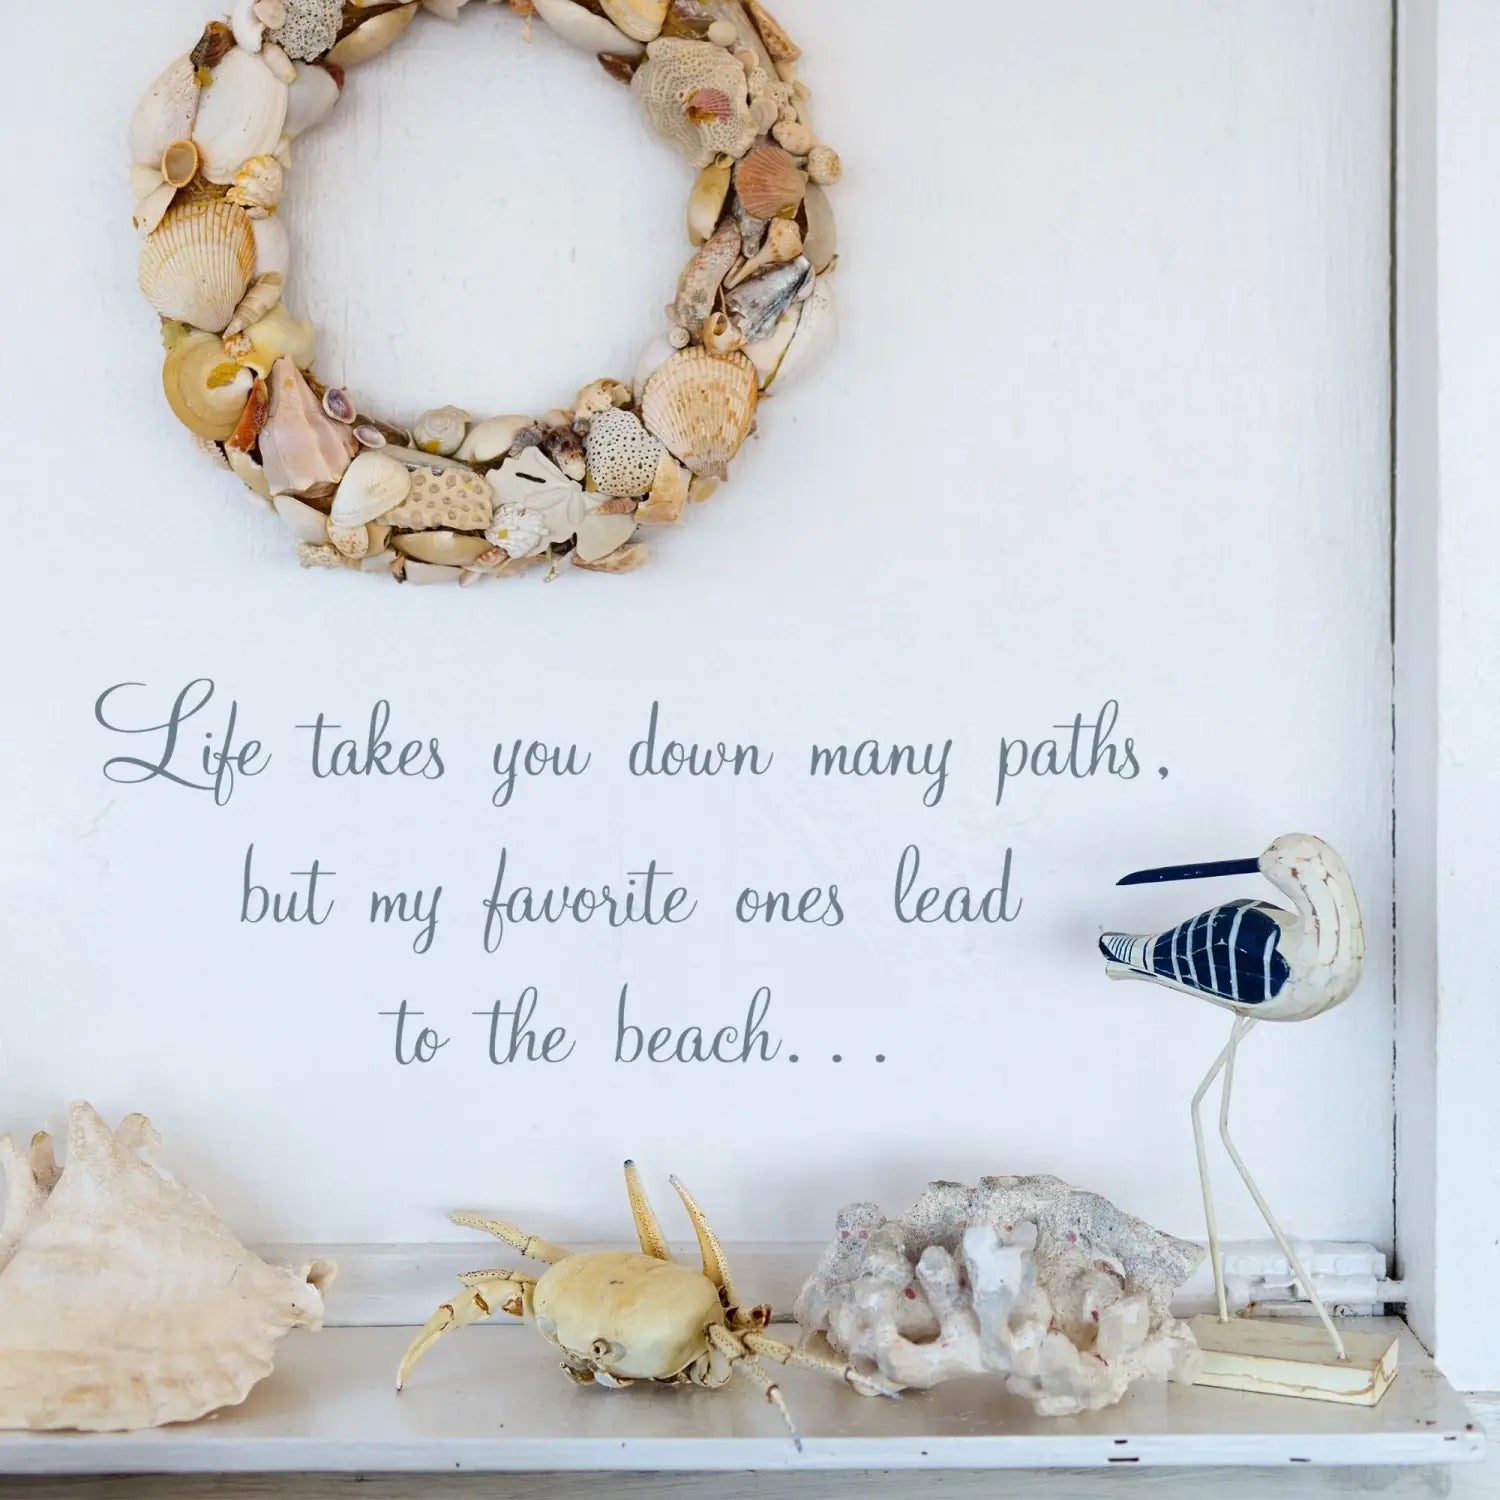 Beautiful summer decor using wall decals. A Simple Stencil display with a nautical theme showing a wall decal that reads: Life takes you down many paths, but my favorite ones lead to the beach...